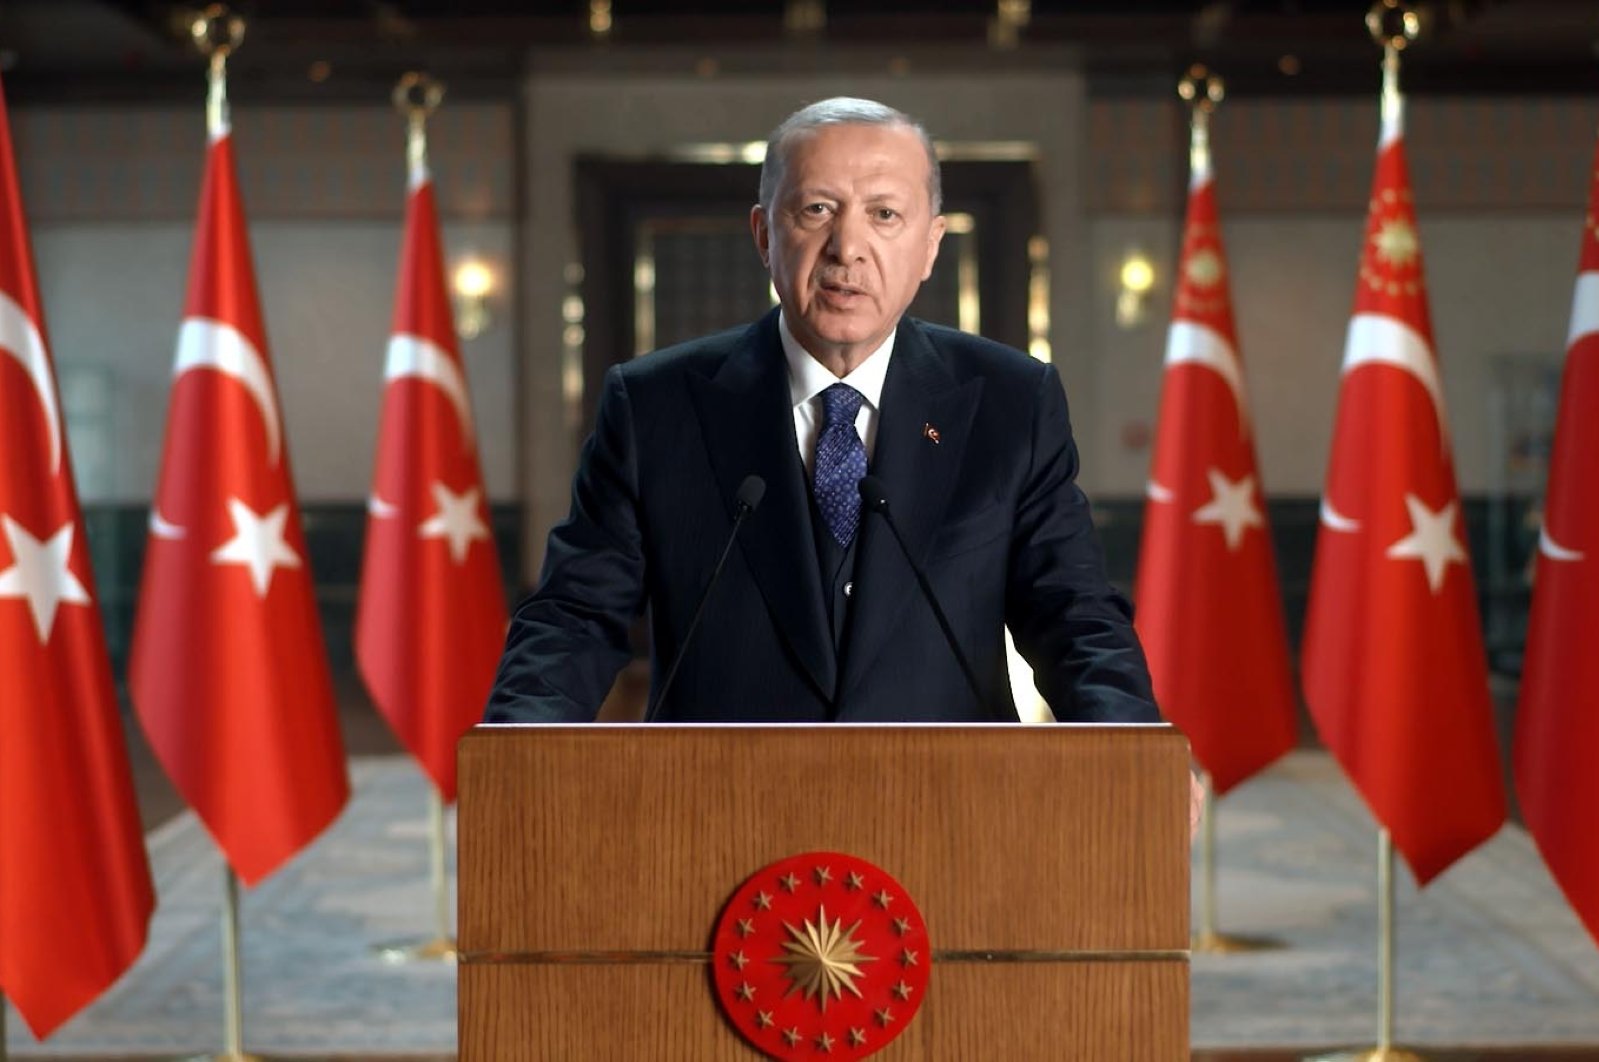 President Recep Tayyip Erdoğan speaks in a video message to the 37th Ministerial Session of the Standing Committee for Economic and Commercial Cooperation (COMCEC) of the Organization of Islamic Cooperation (OIC) in Istanbul, Turkey, Nov. 24, 2021. (DHA Photo)